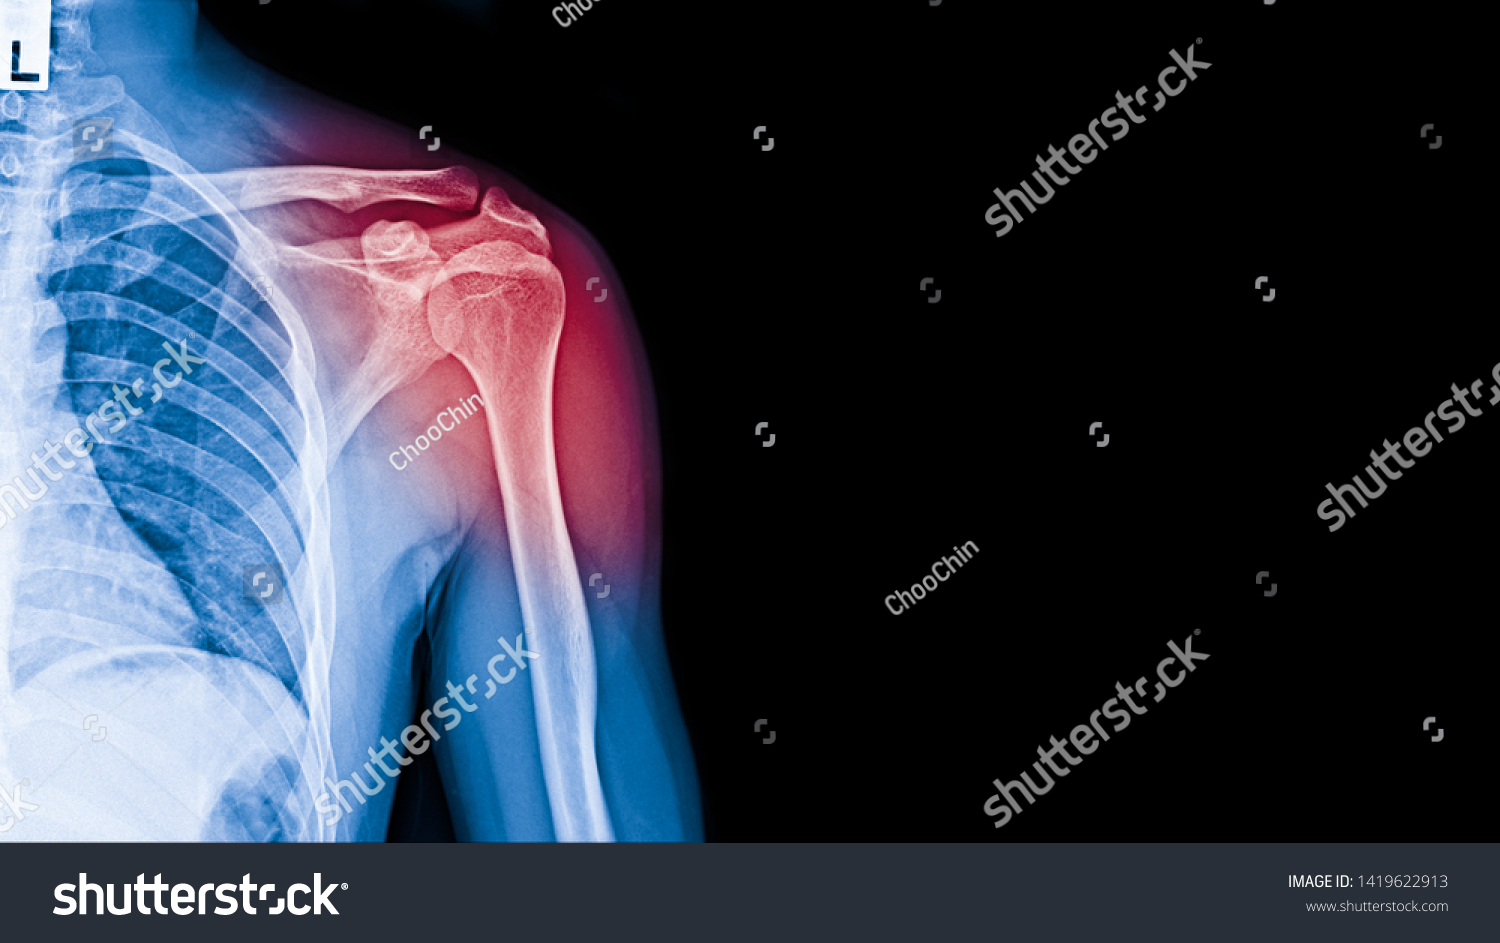 when is muscle pain xray